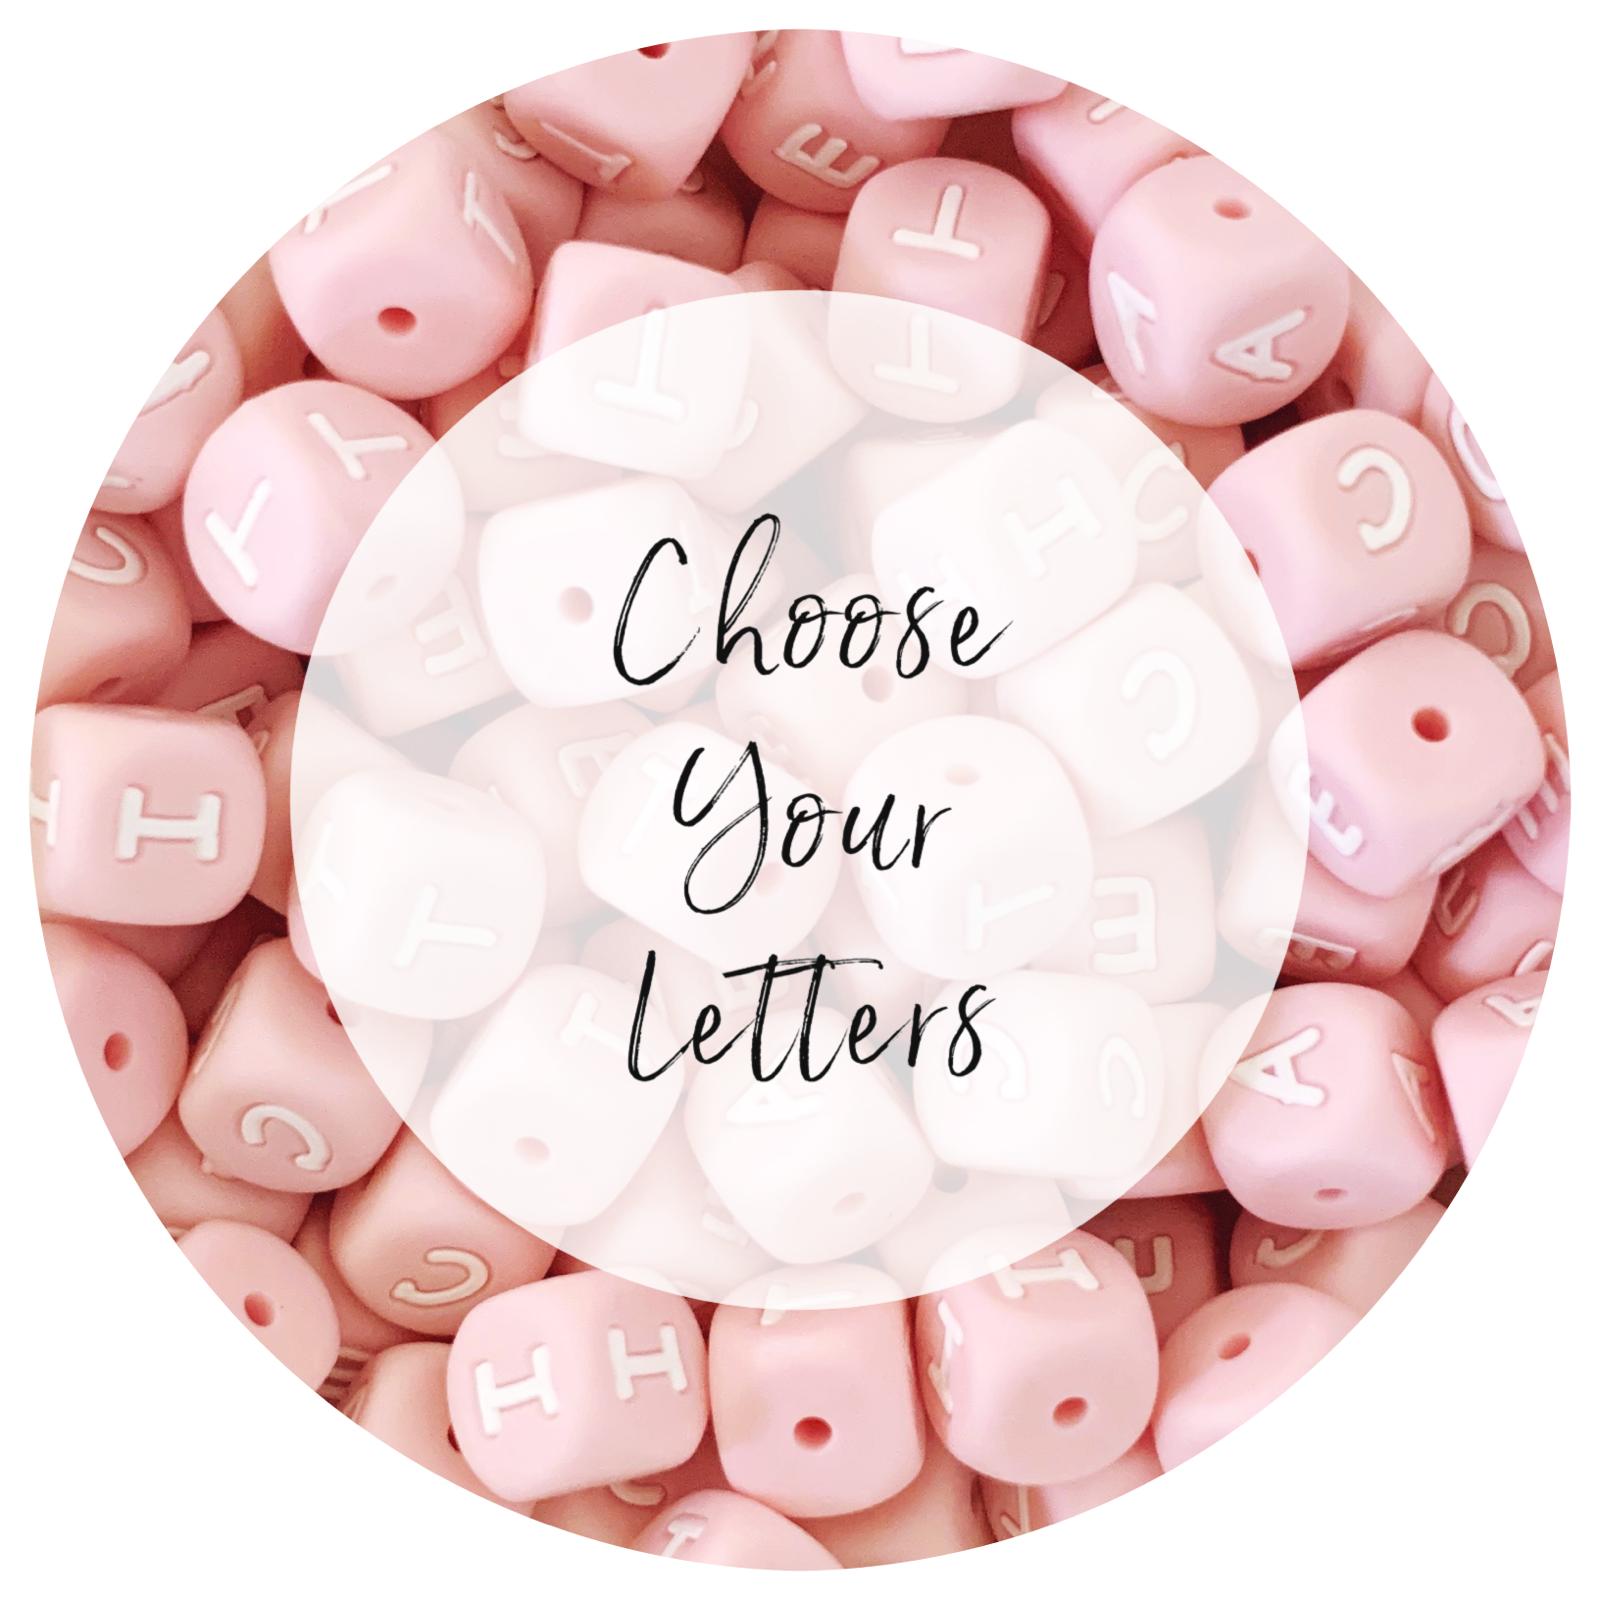 12mm Blush Pink Silicone Letter Beads - Choose Your Letters - Each